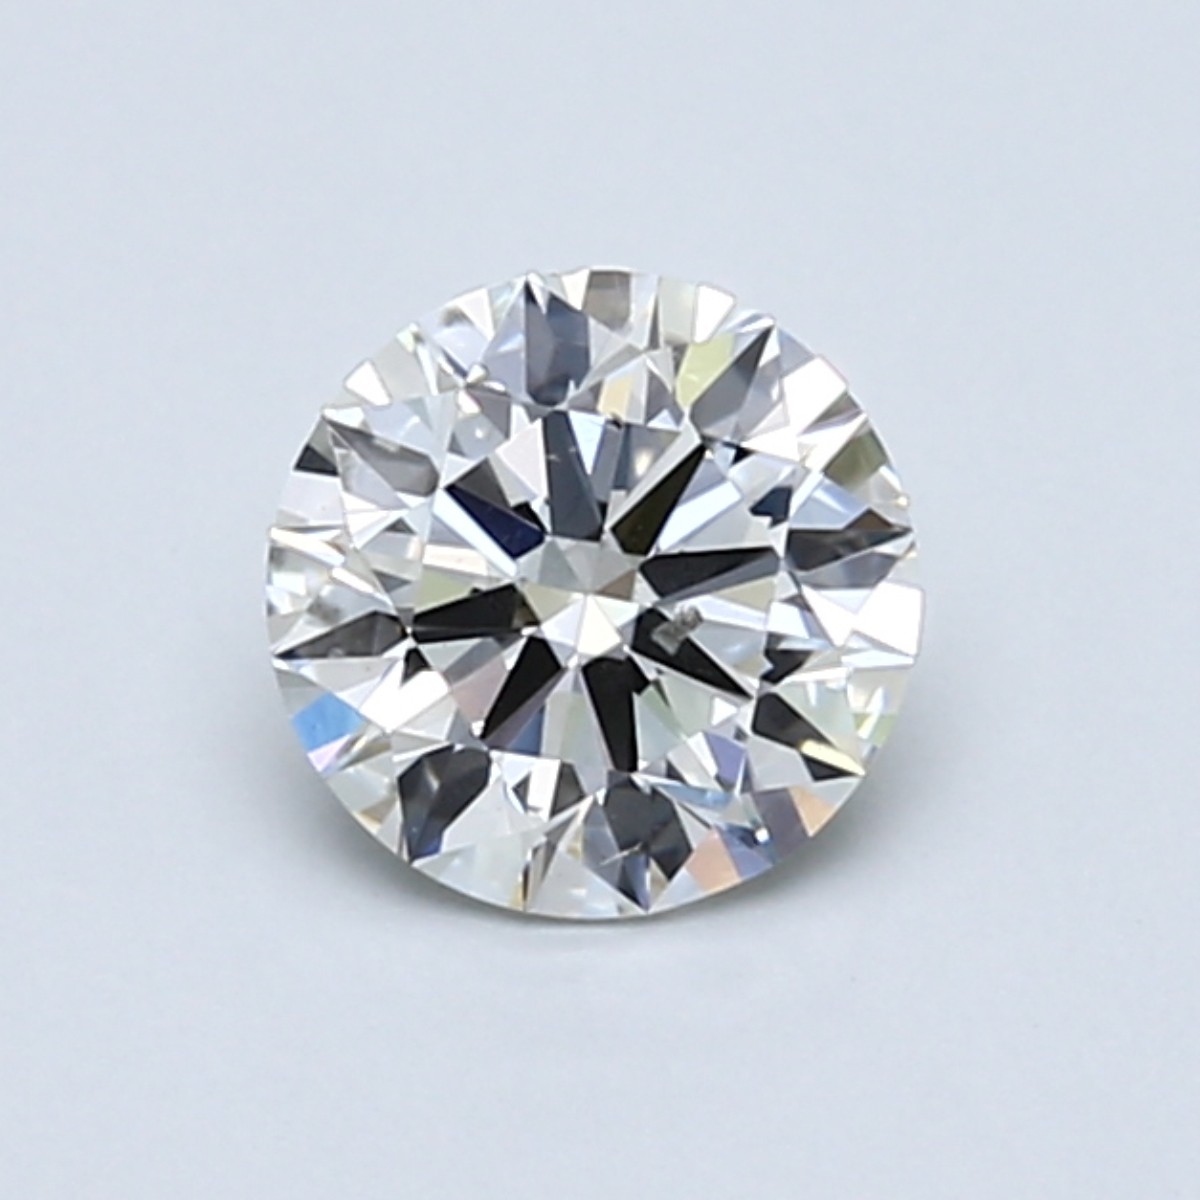 Round 0.8 Carat I Color SI2 Clarity For Sale